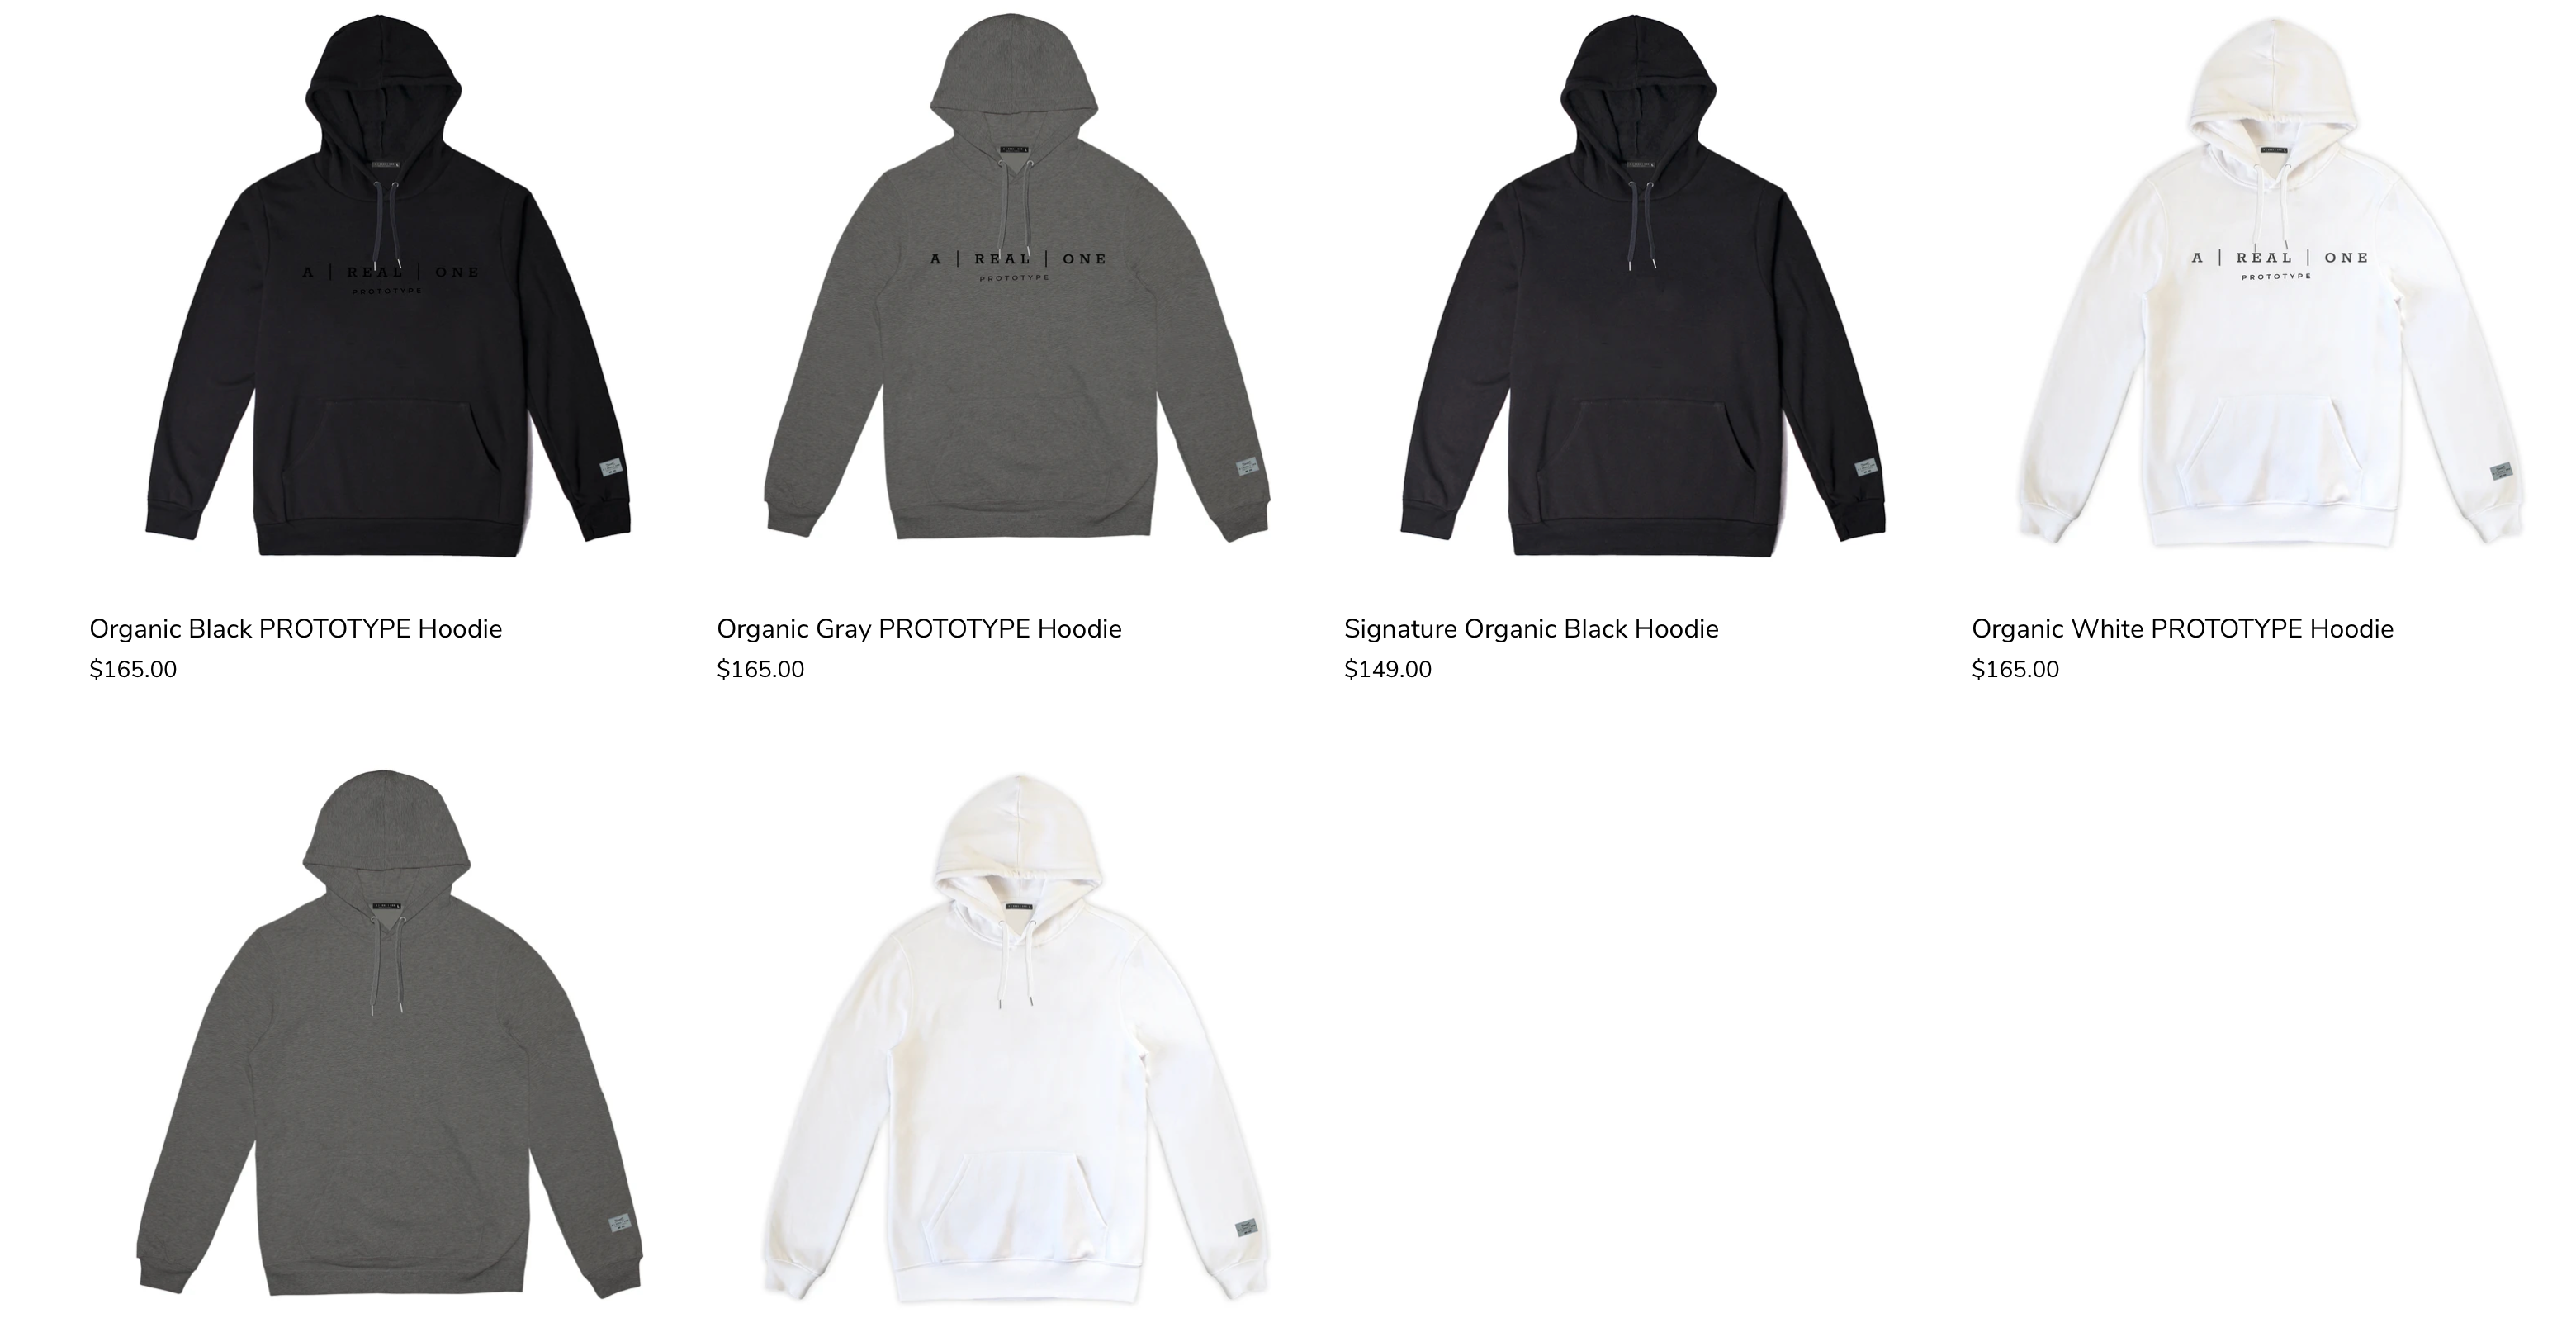 Taking you on the production journey of our signature and prototype hoodies